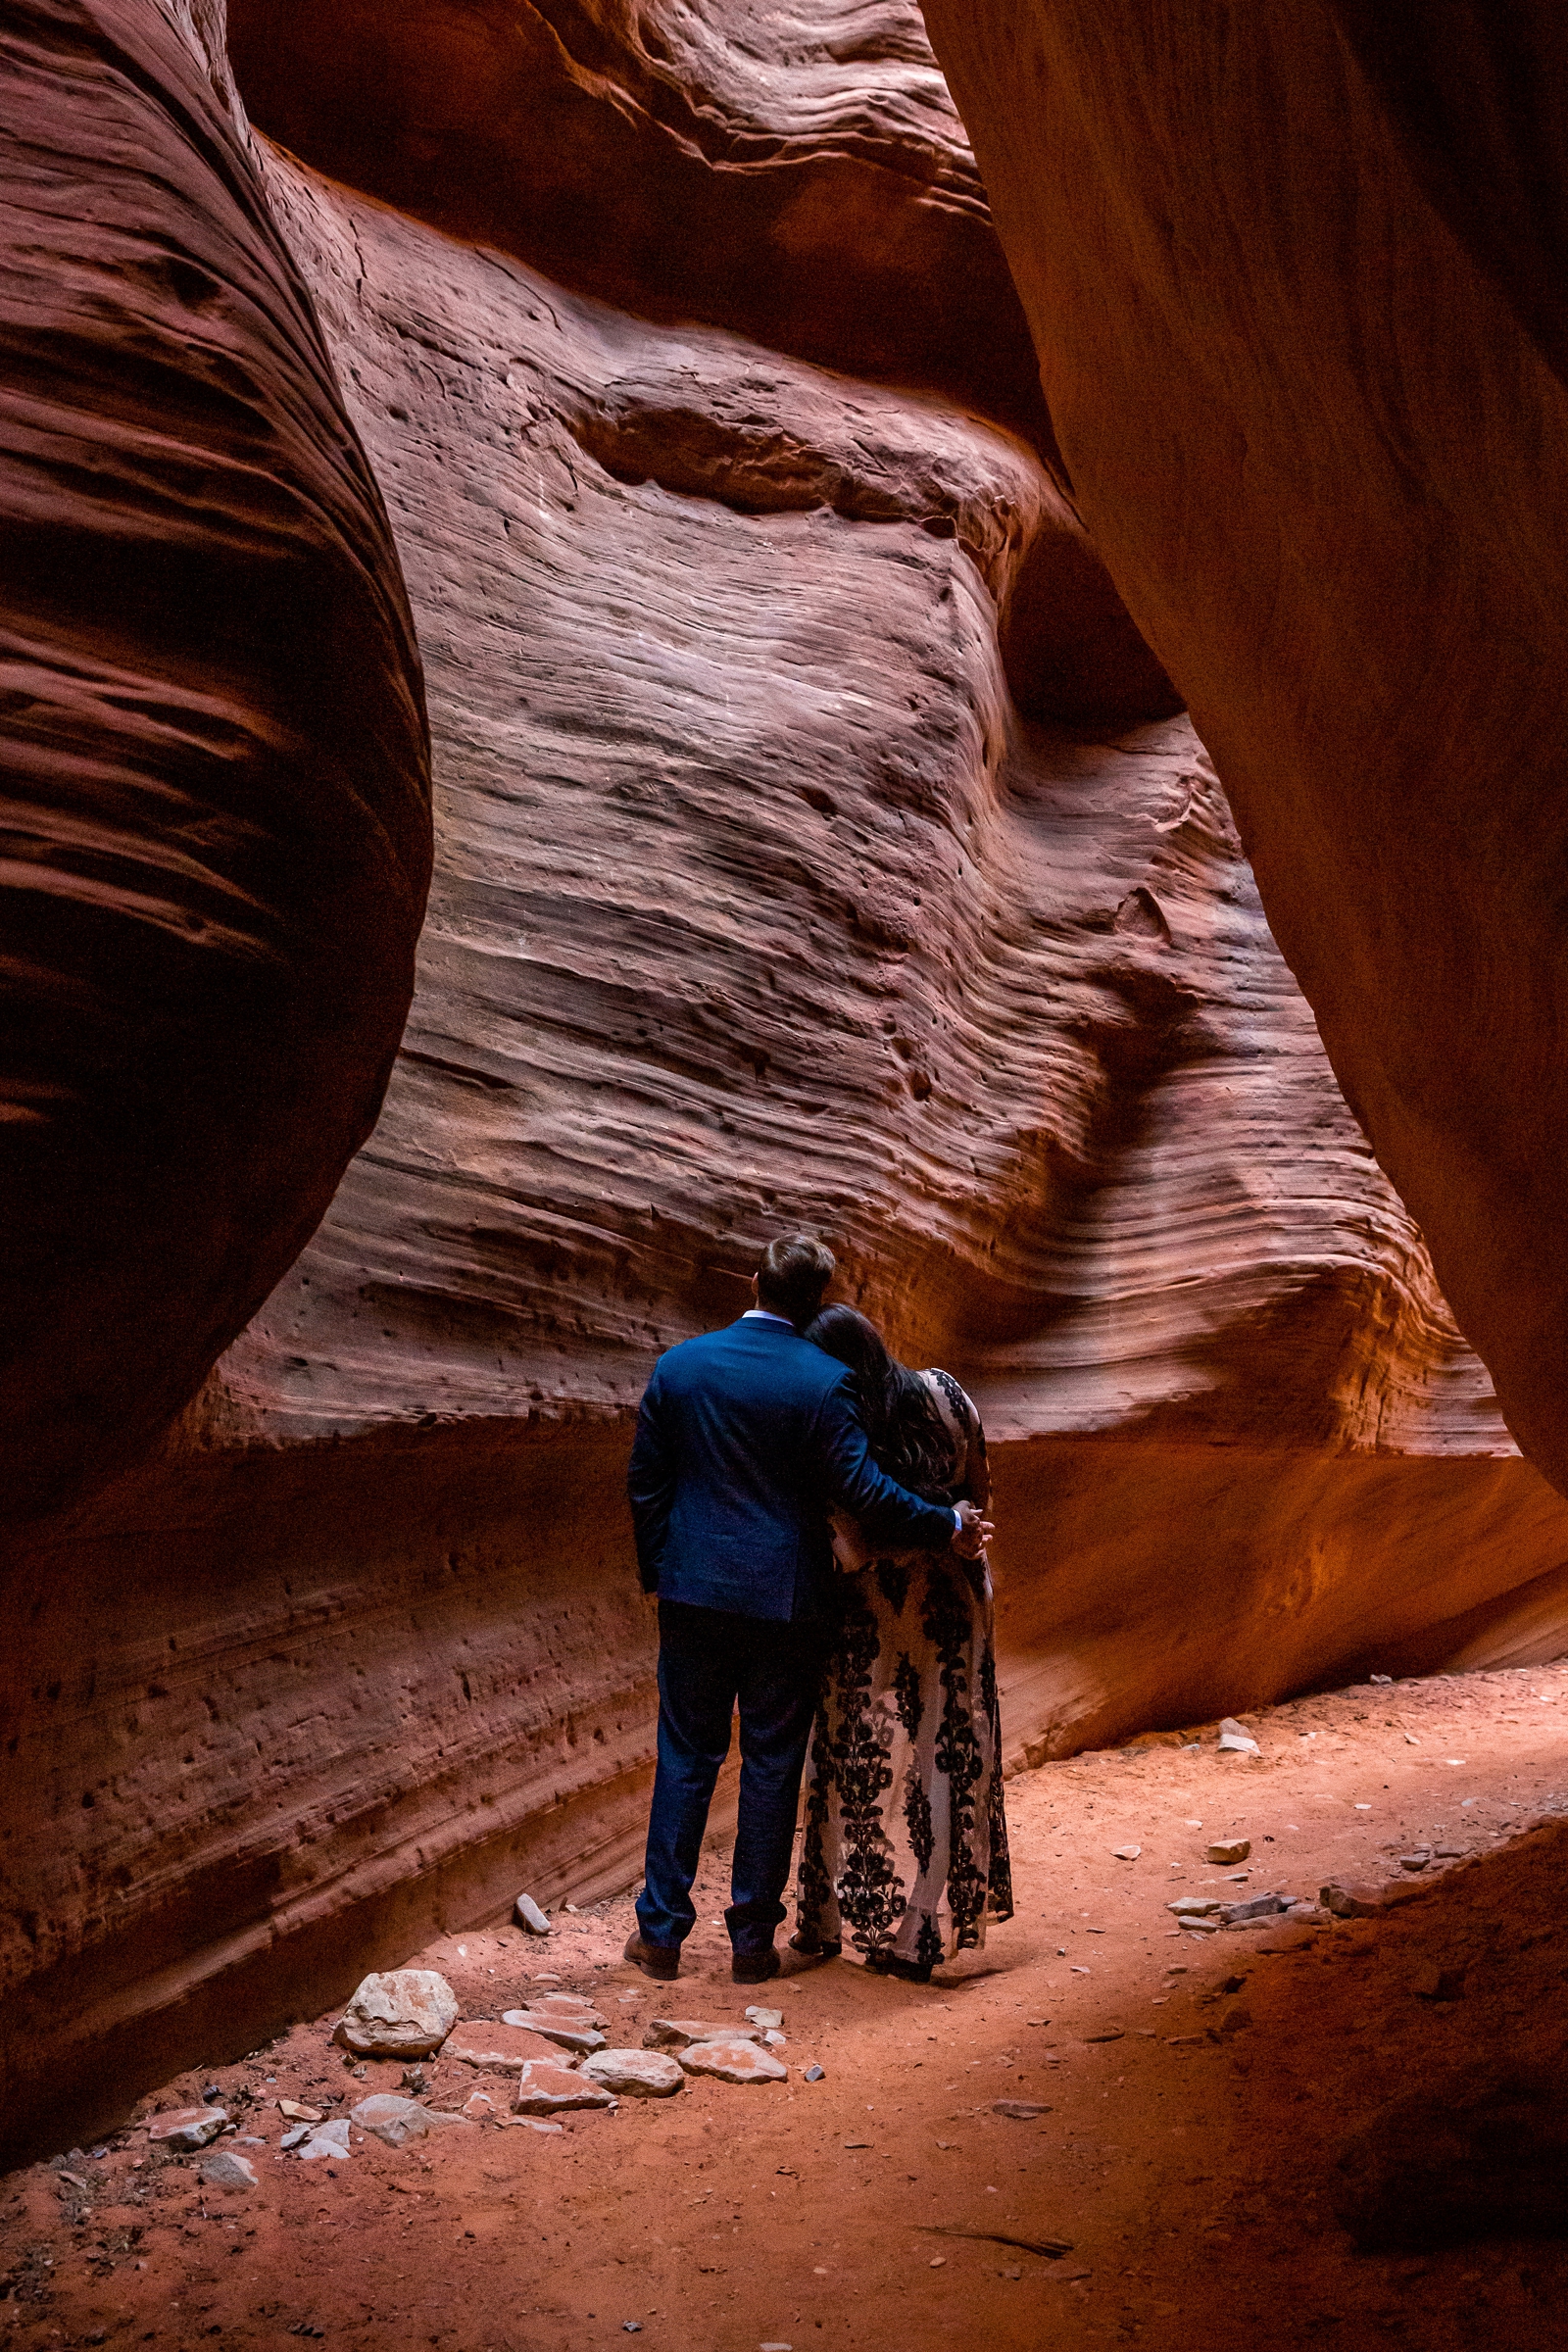 Dreamy engagement session in a UT slot canyon.